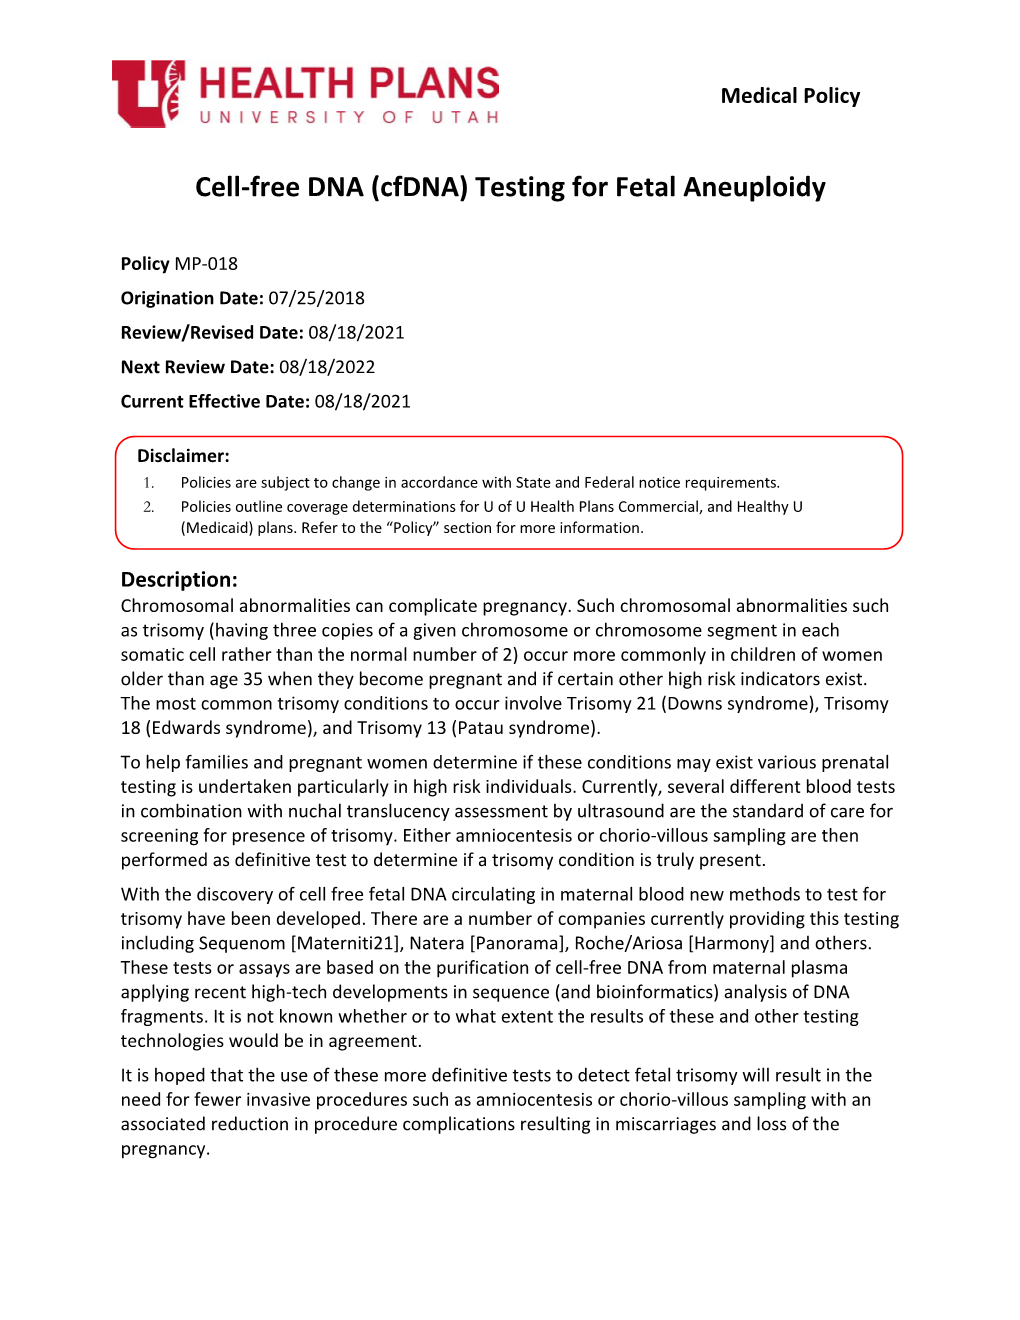 Cell-Free DNA (Cfdna) Testing for Fetal Aneuploidy